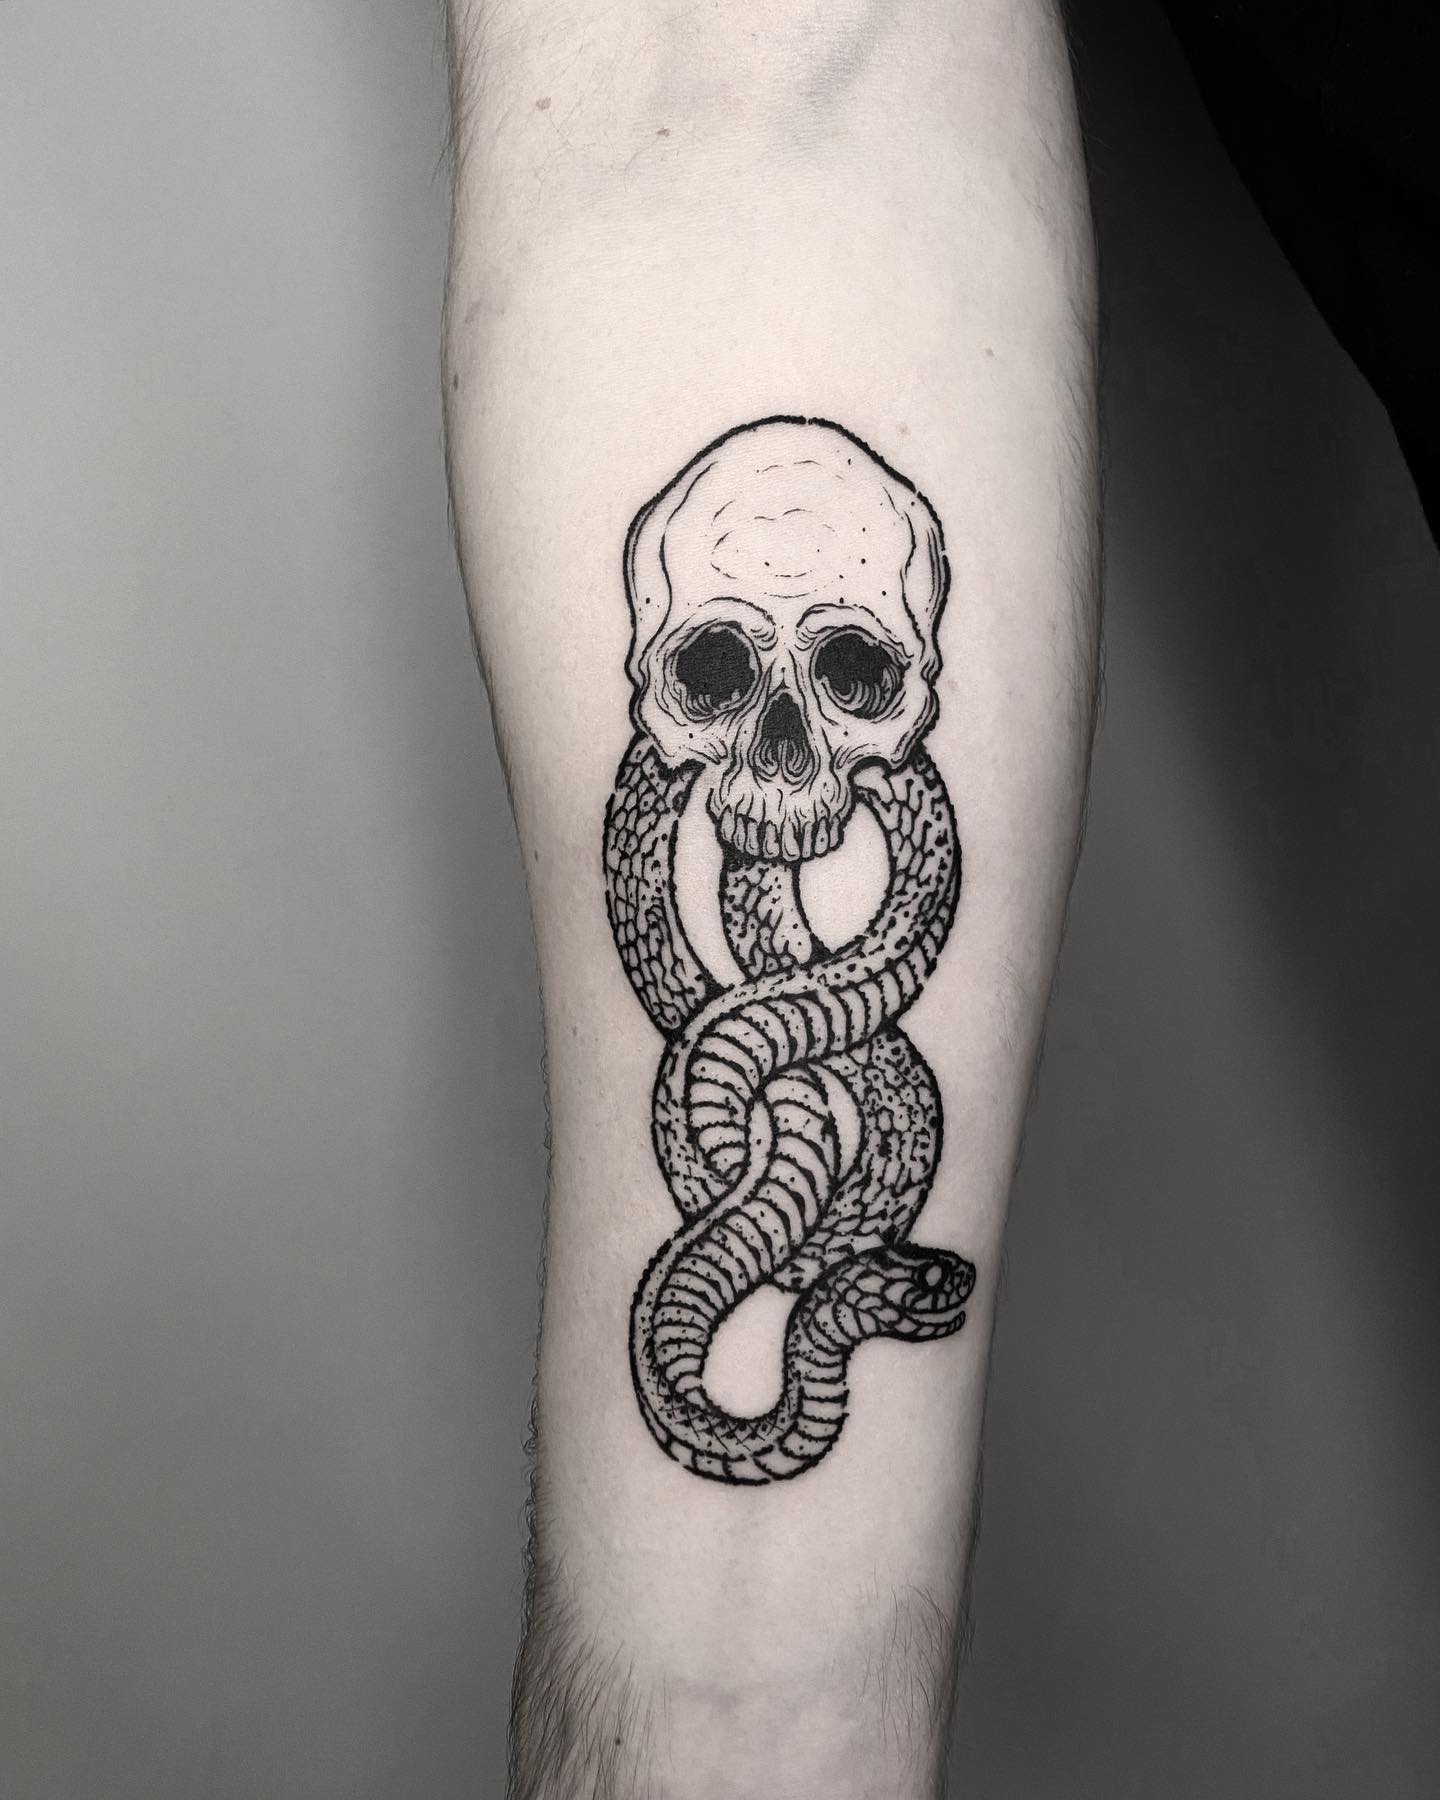 I am fascinated by the idea of using a linework death eater tattoo as a way to express your own unique style. The lines are great in general, and this tattoo looks like it could be a great way to show off your personal style on your arm.